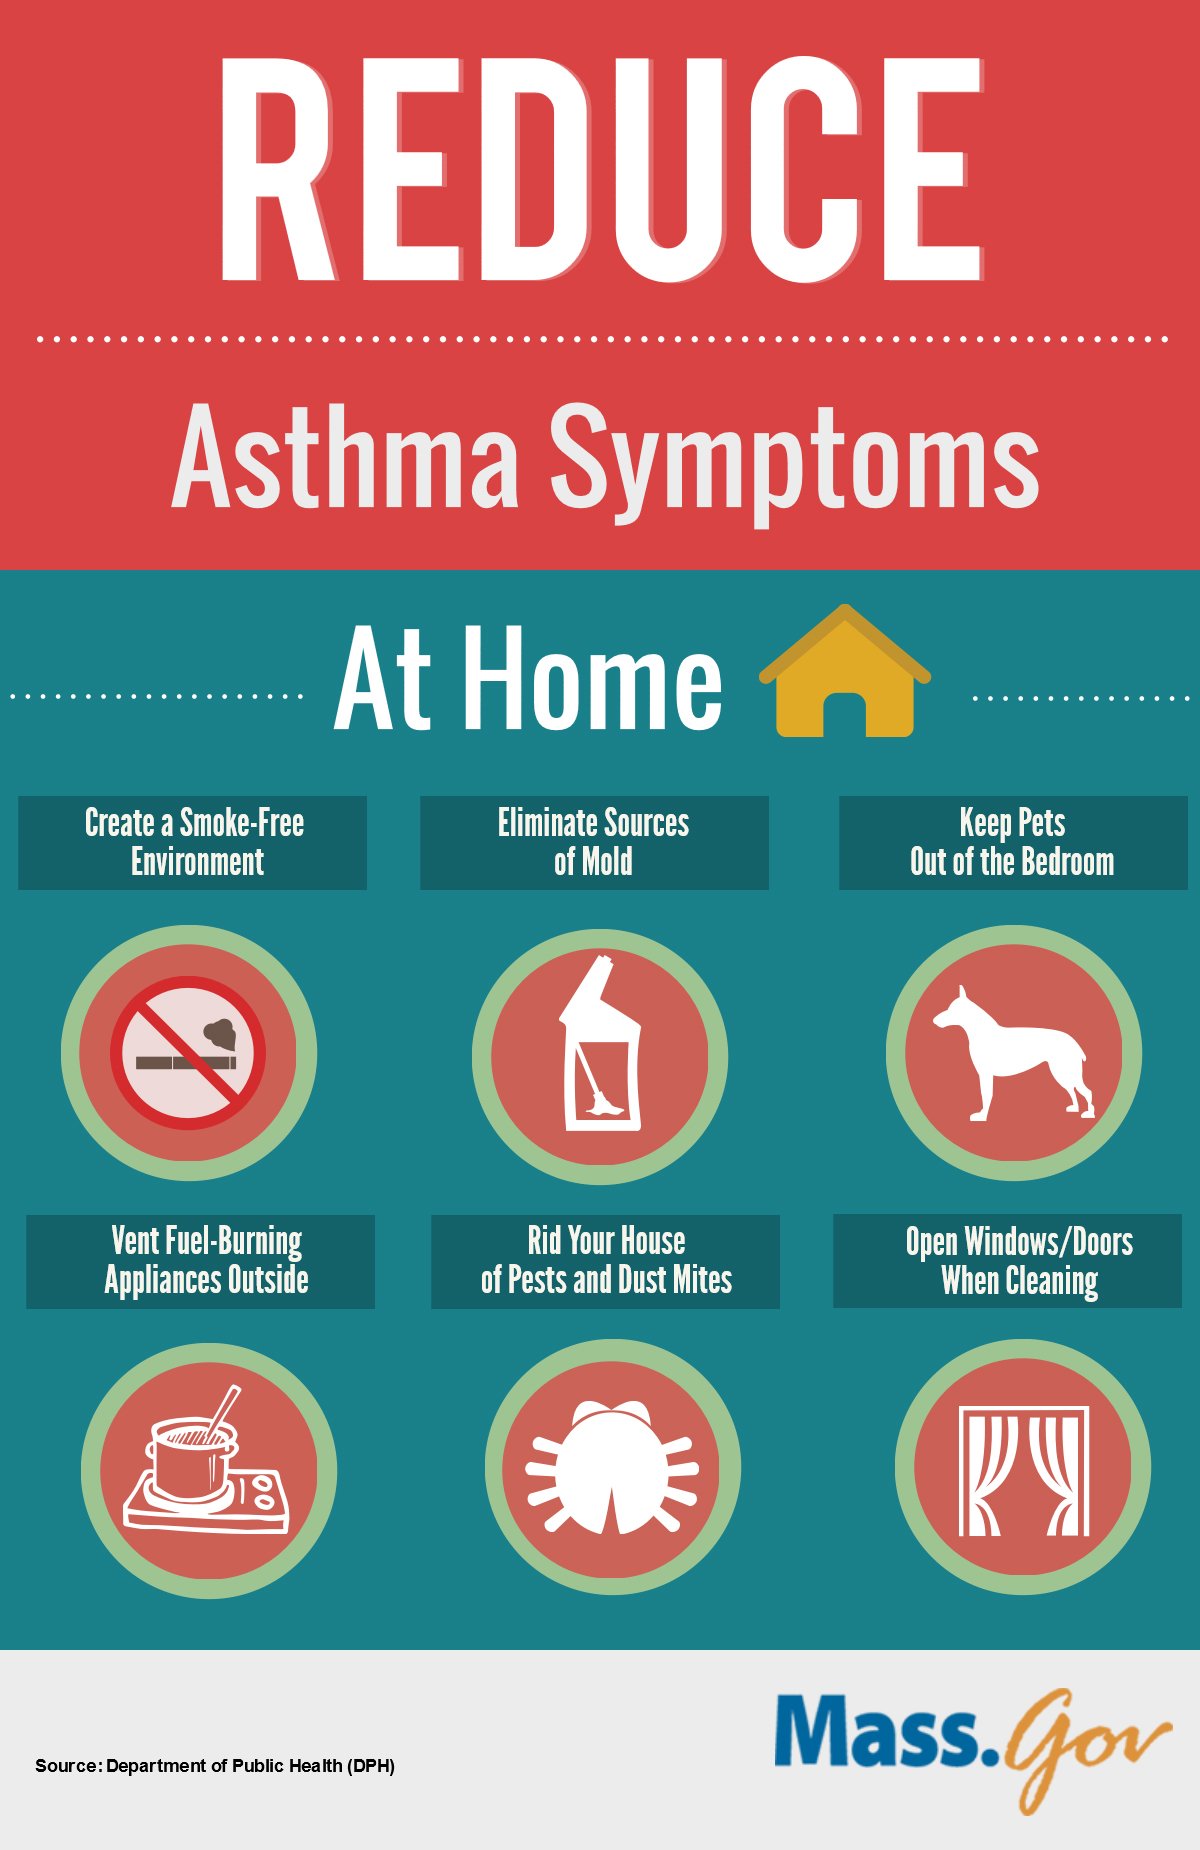 How You Can Reduce Asthma Symptoms at Home and Work